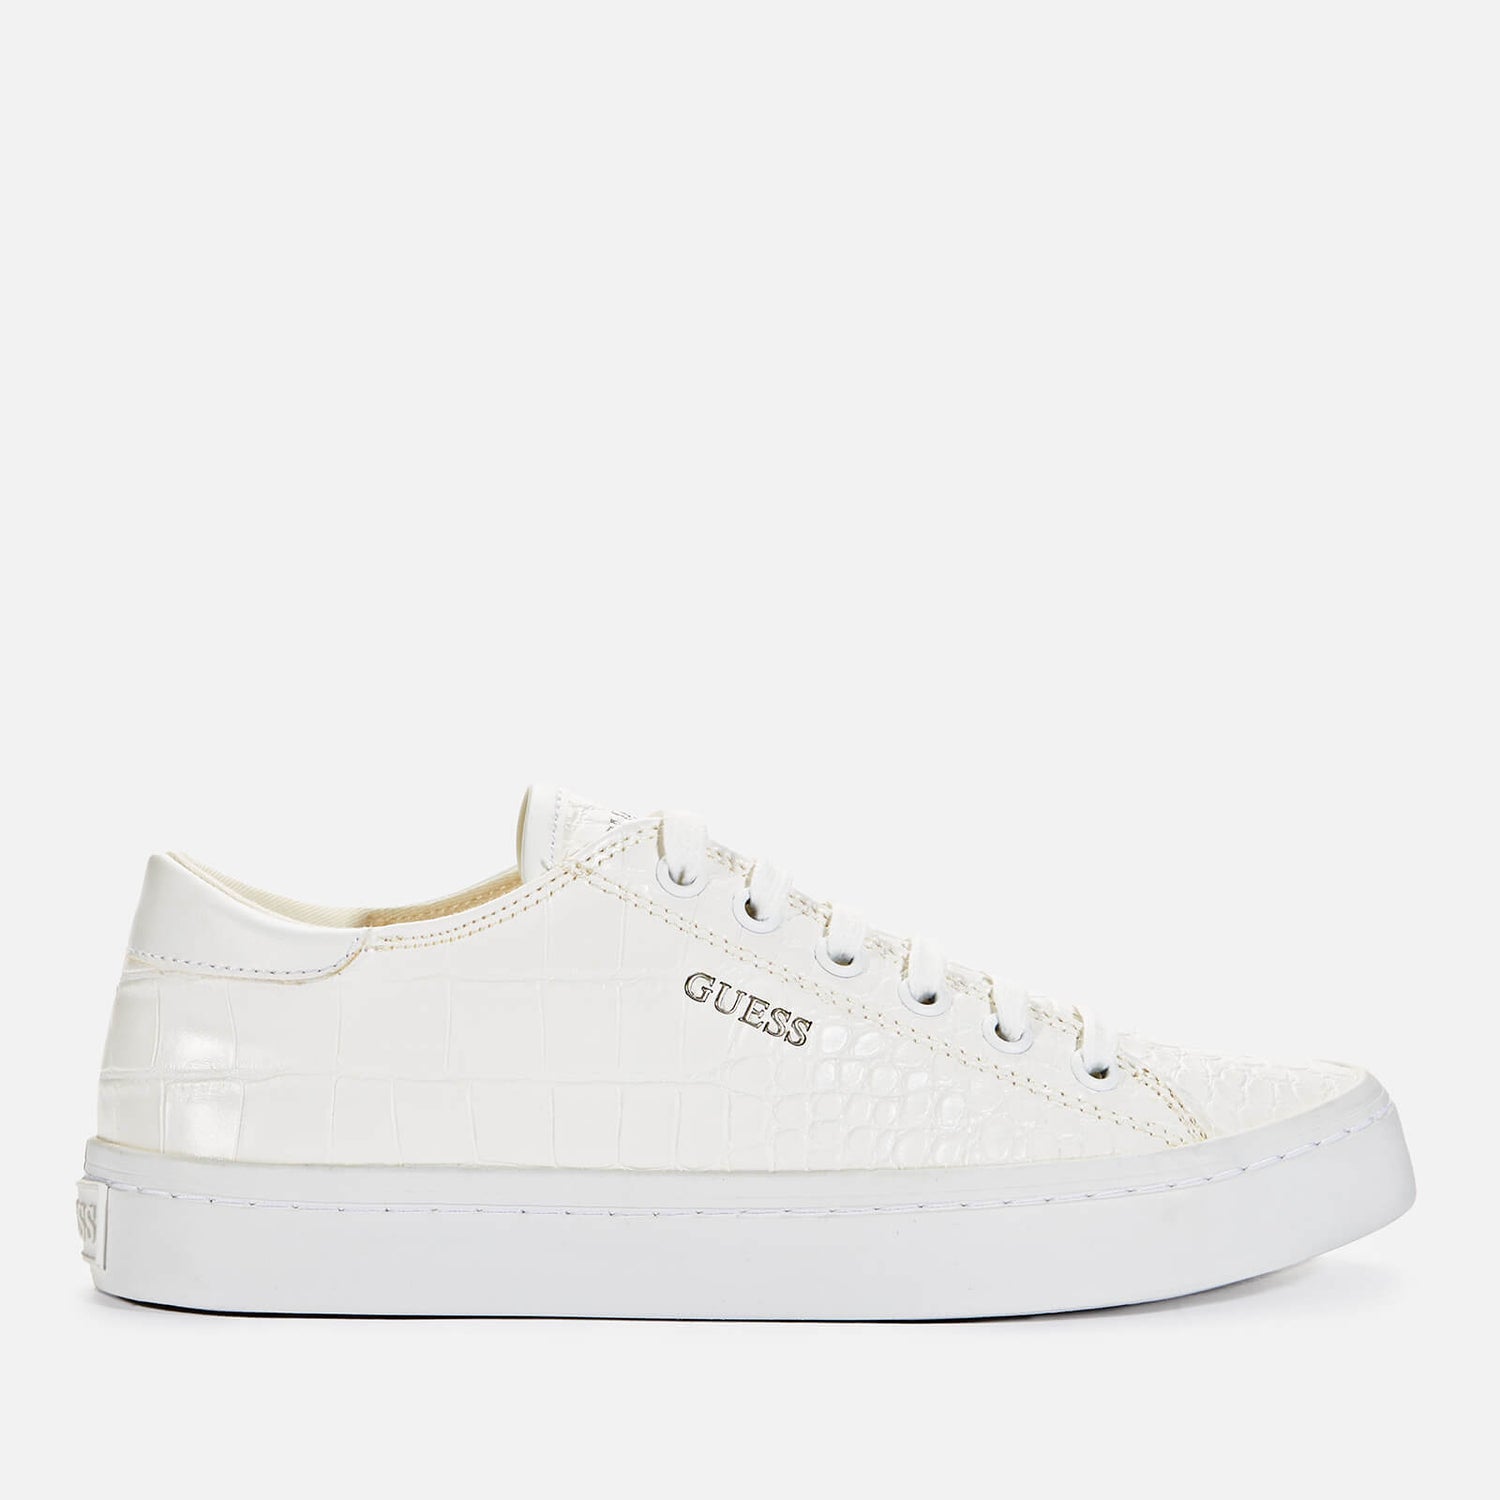 Guess Women's Ester Printed Leather Low Top Trainers - White - UK 3